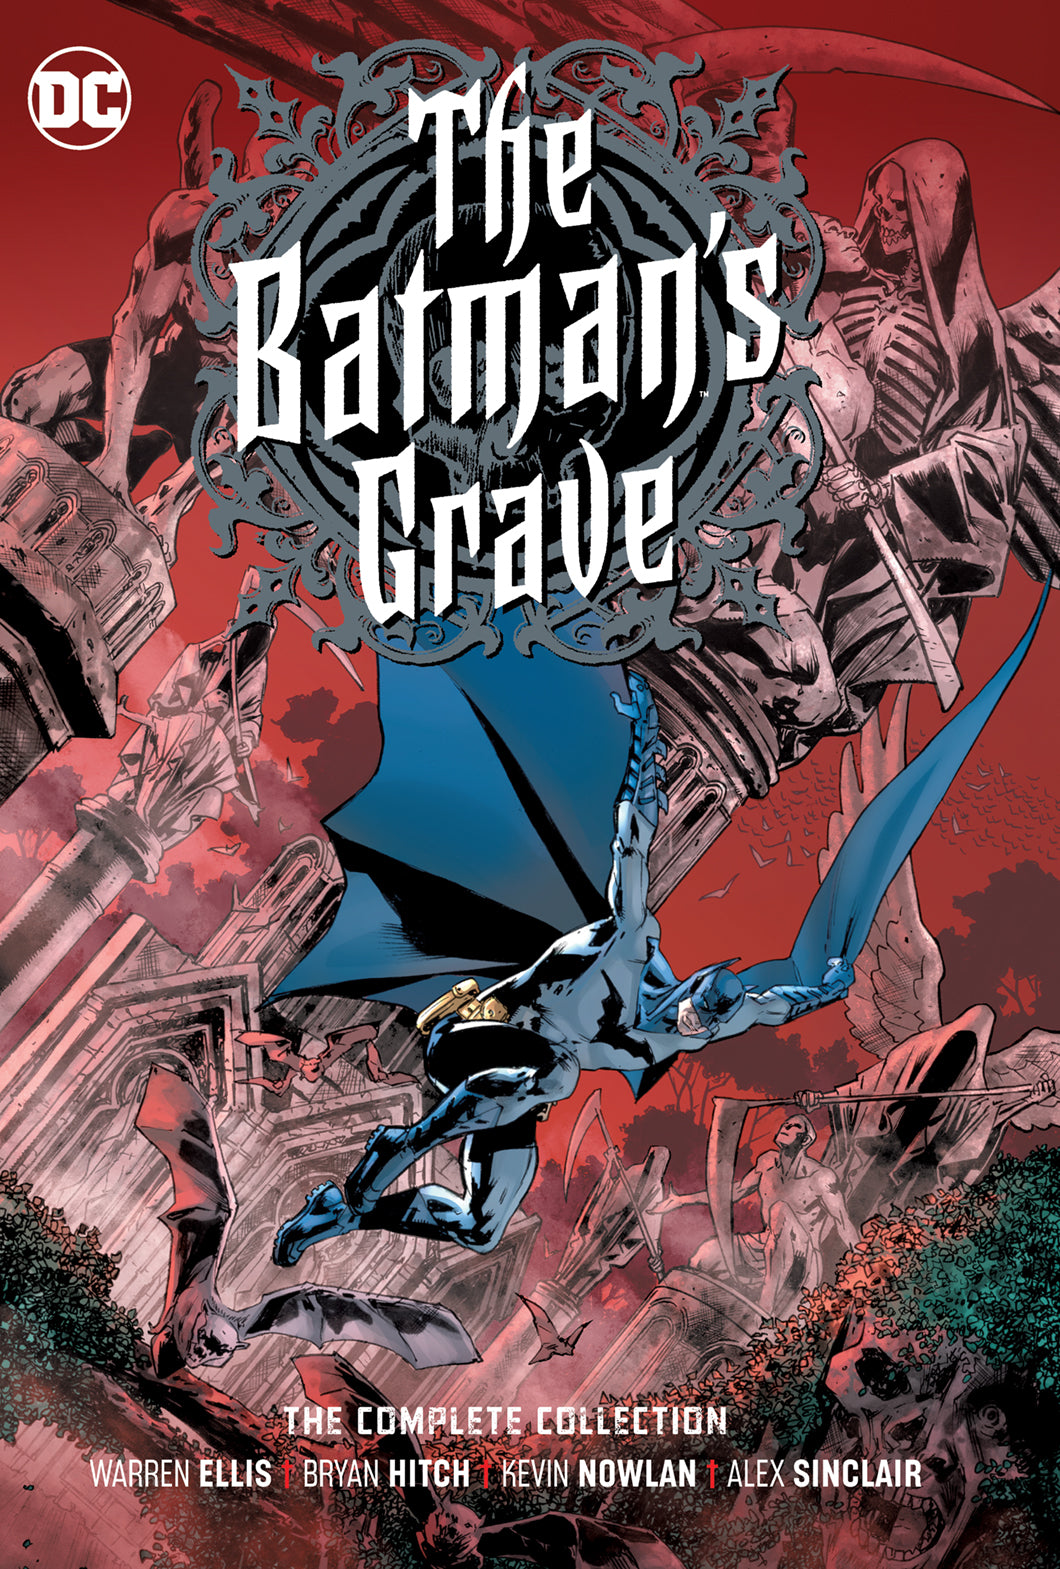 BATMANS GRAVE THE COMPLETE COLLECTION TRADE PAPERBACK